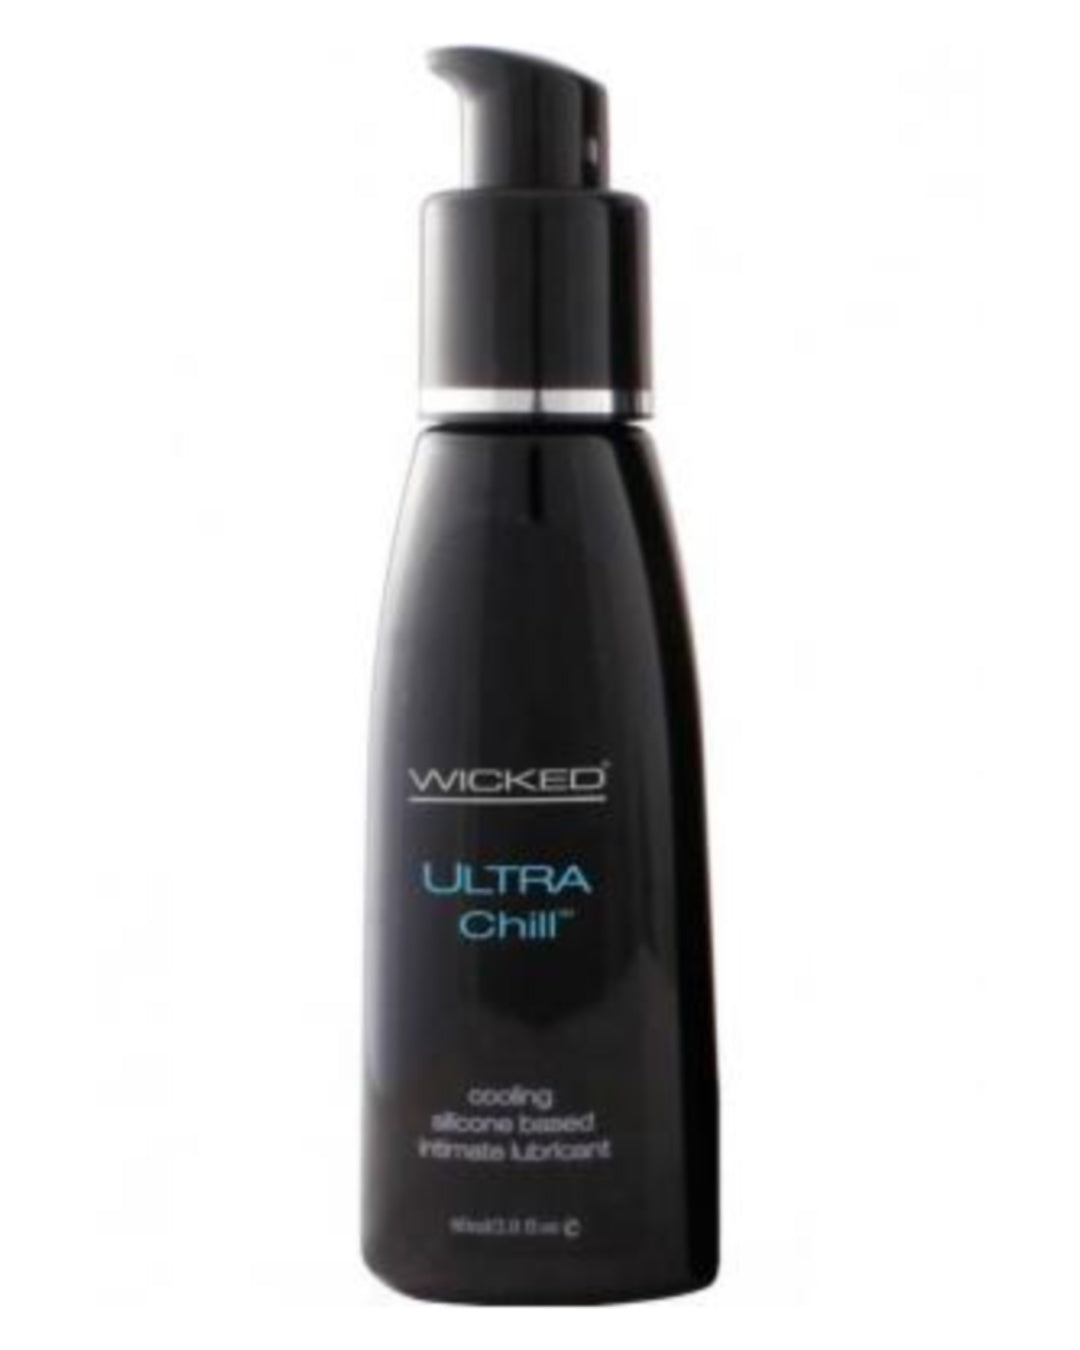 Wicked Aqua Chill Water Based Cooling Lubricant 2 oz.